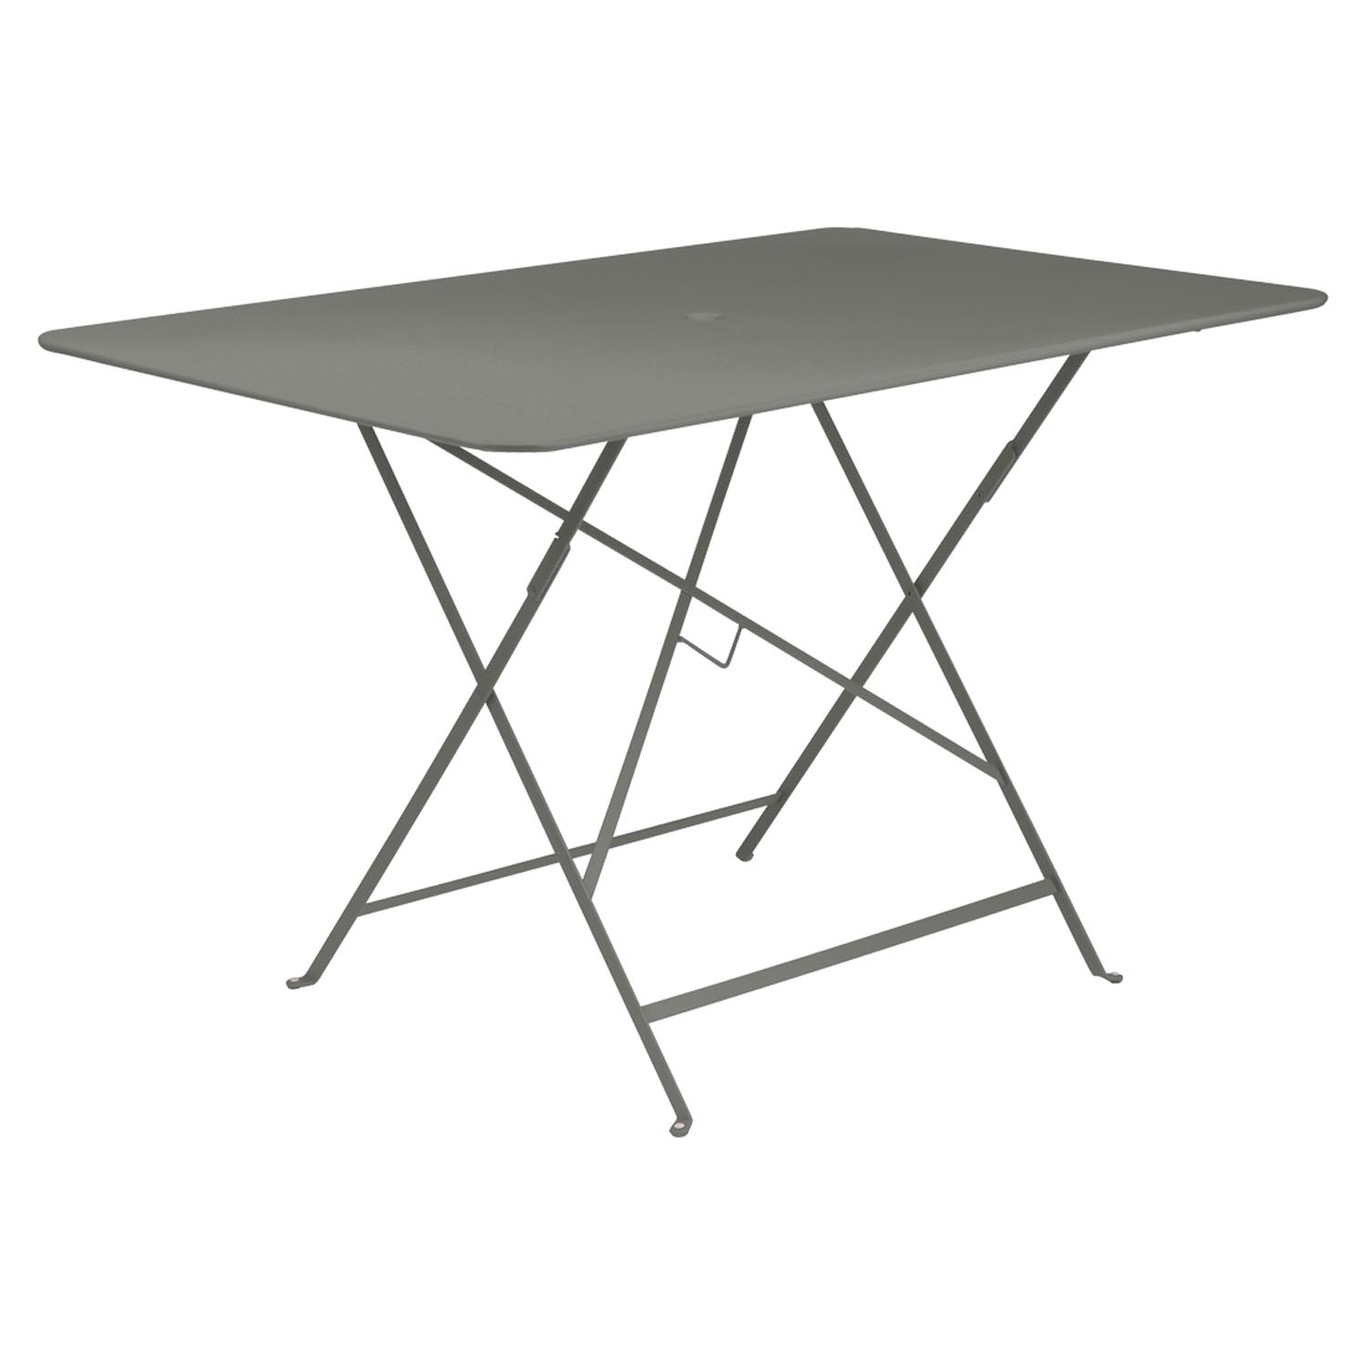 Bistro Table 117x77, Rosemary